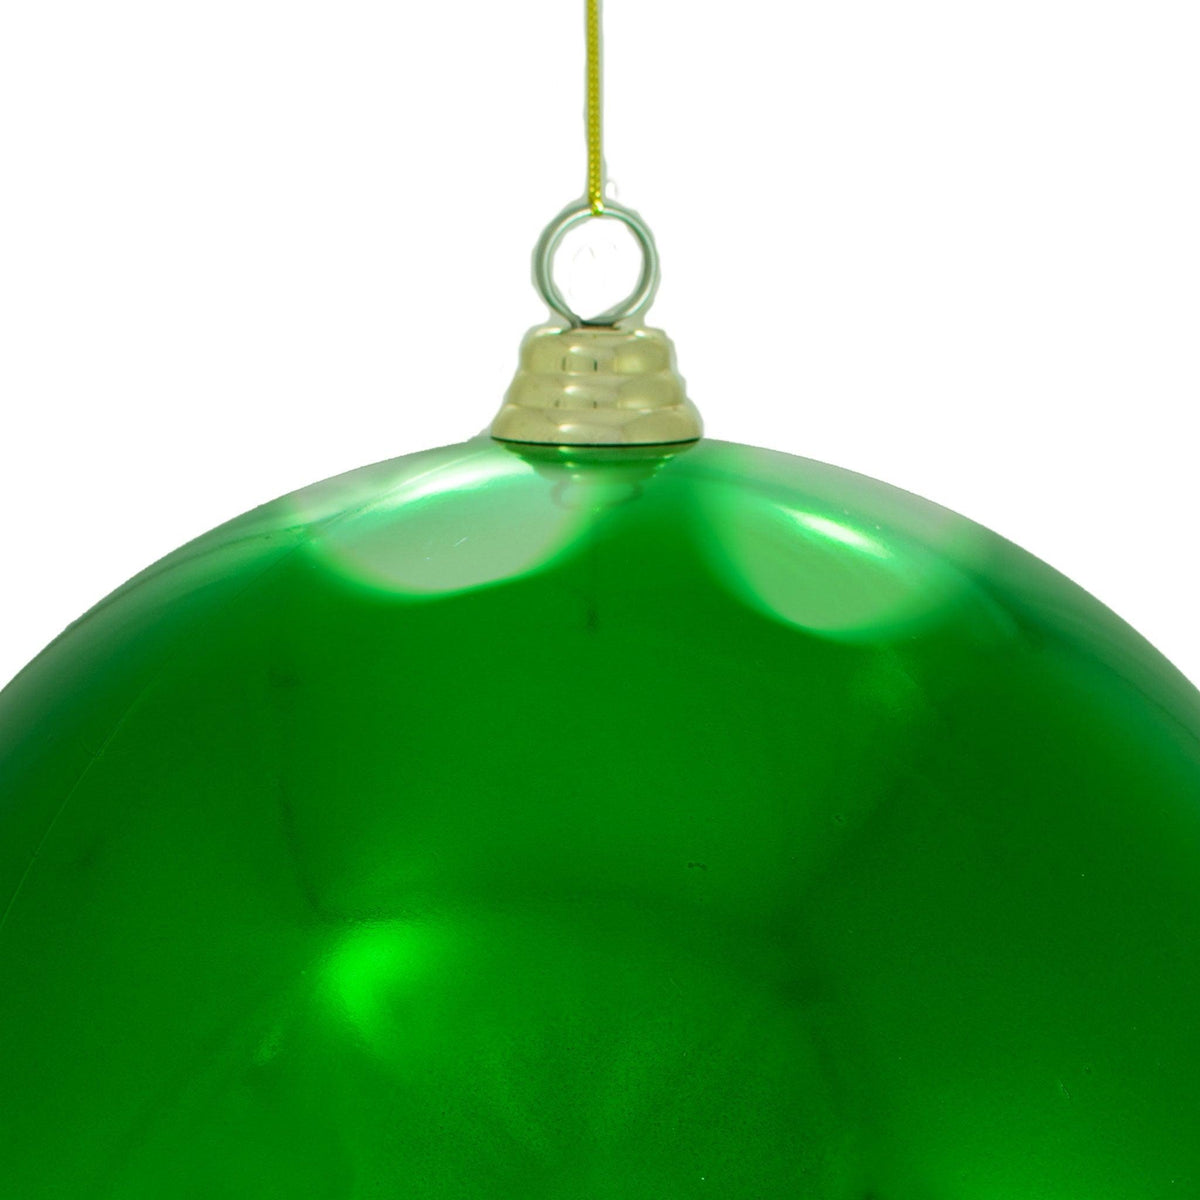 Top of the Shiny Green ball ornament with a gold cap and hanging string included